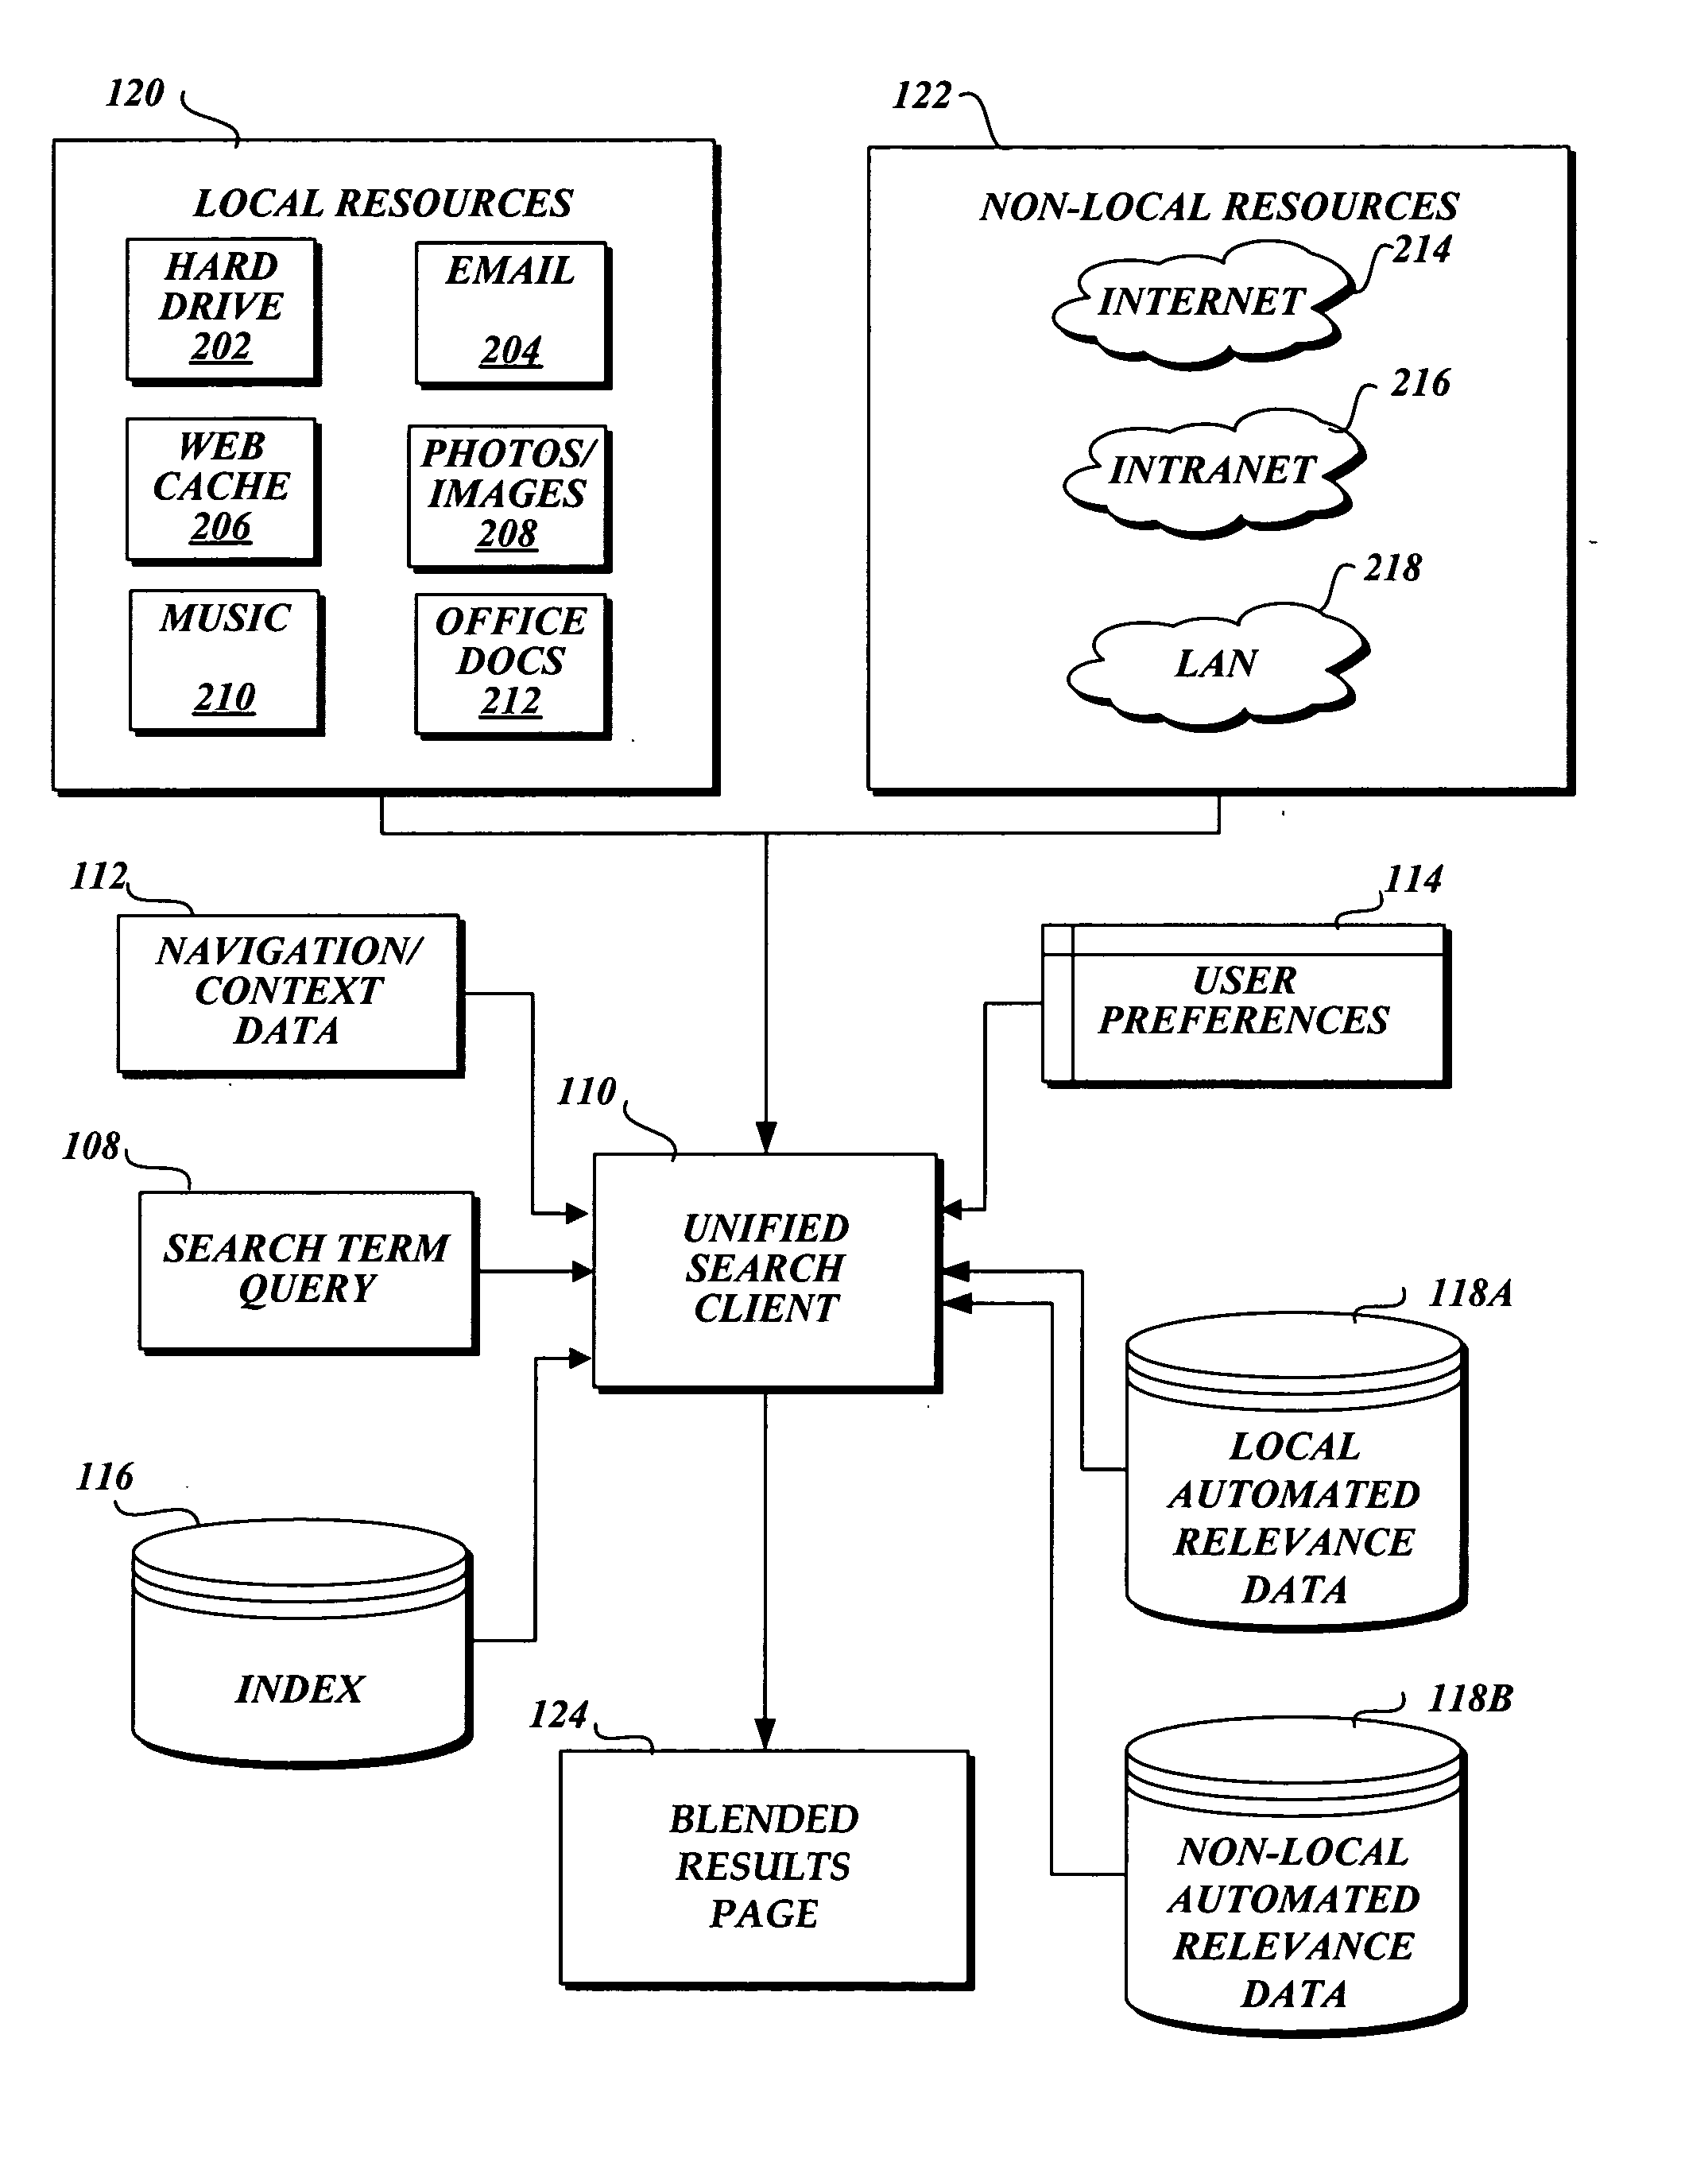 System and method for a unified and blended search